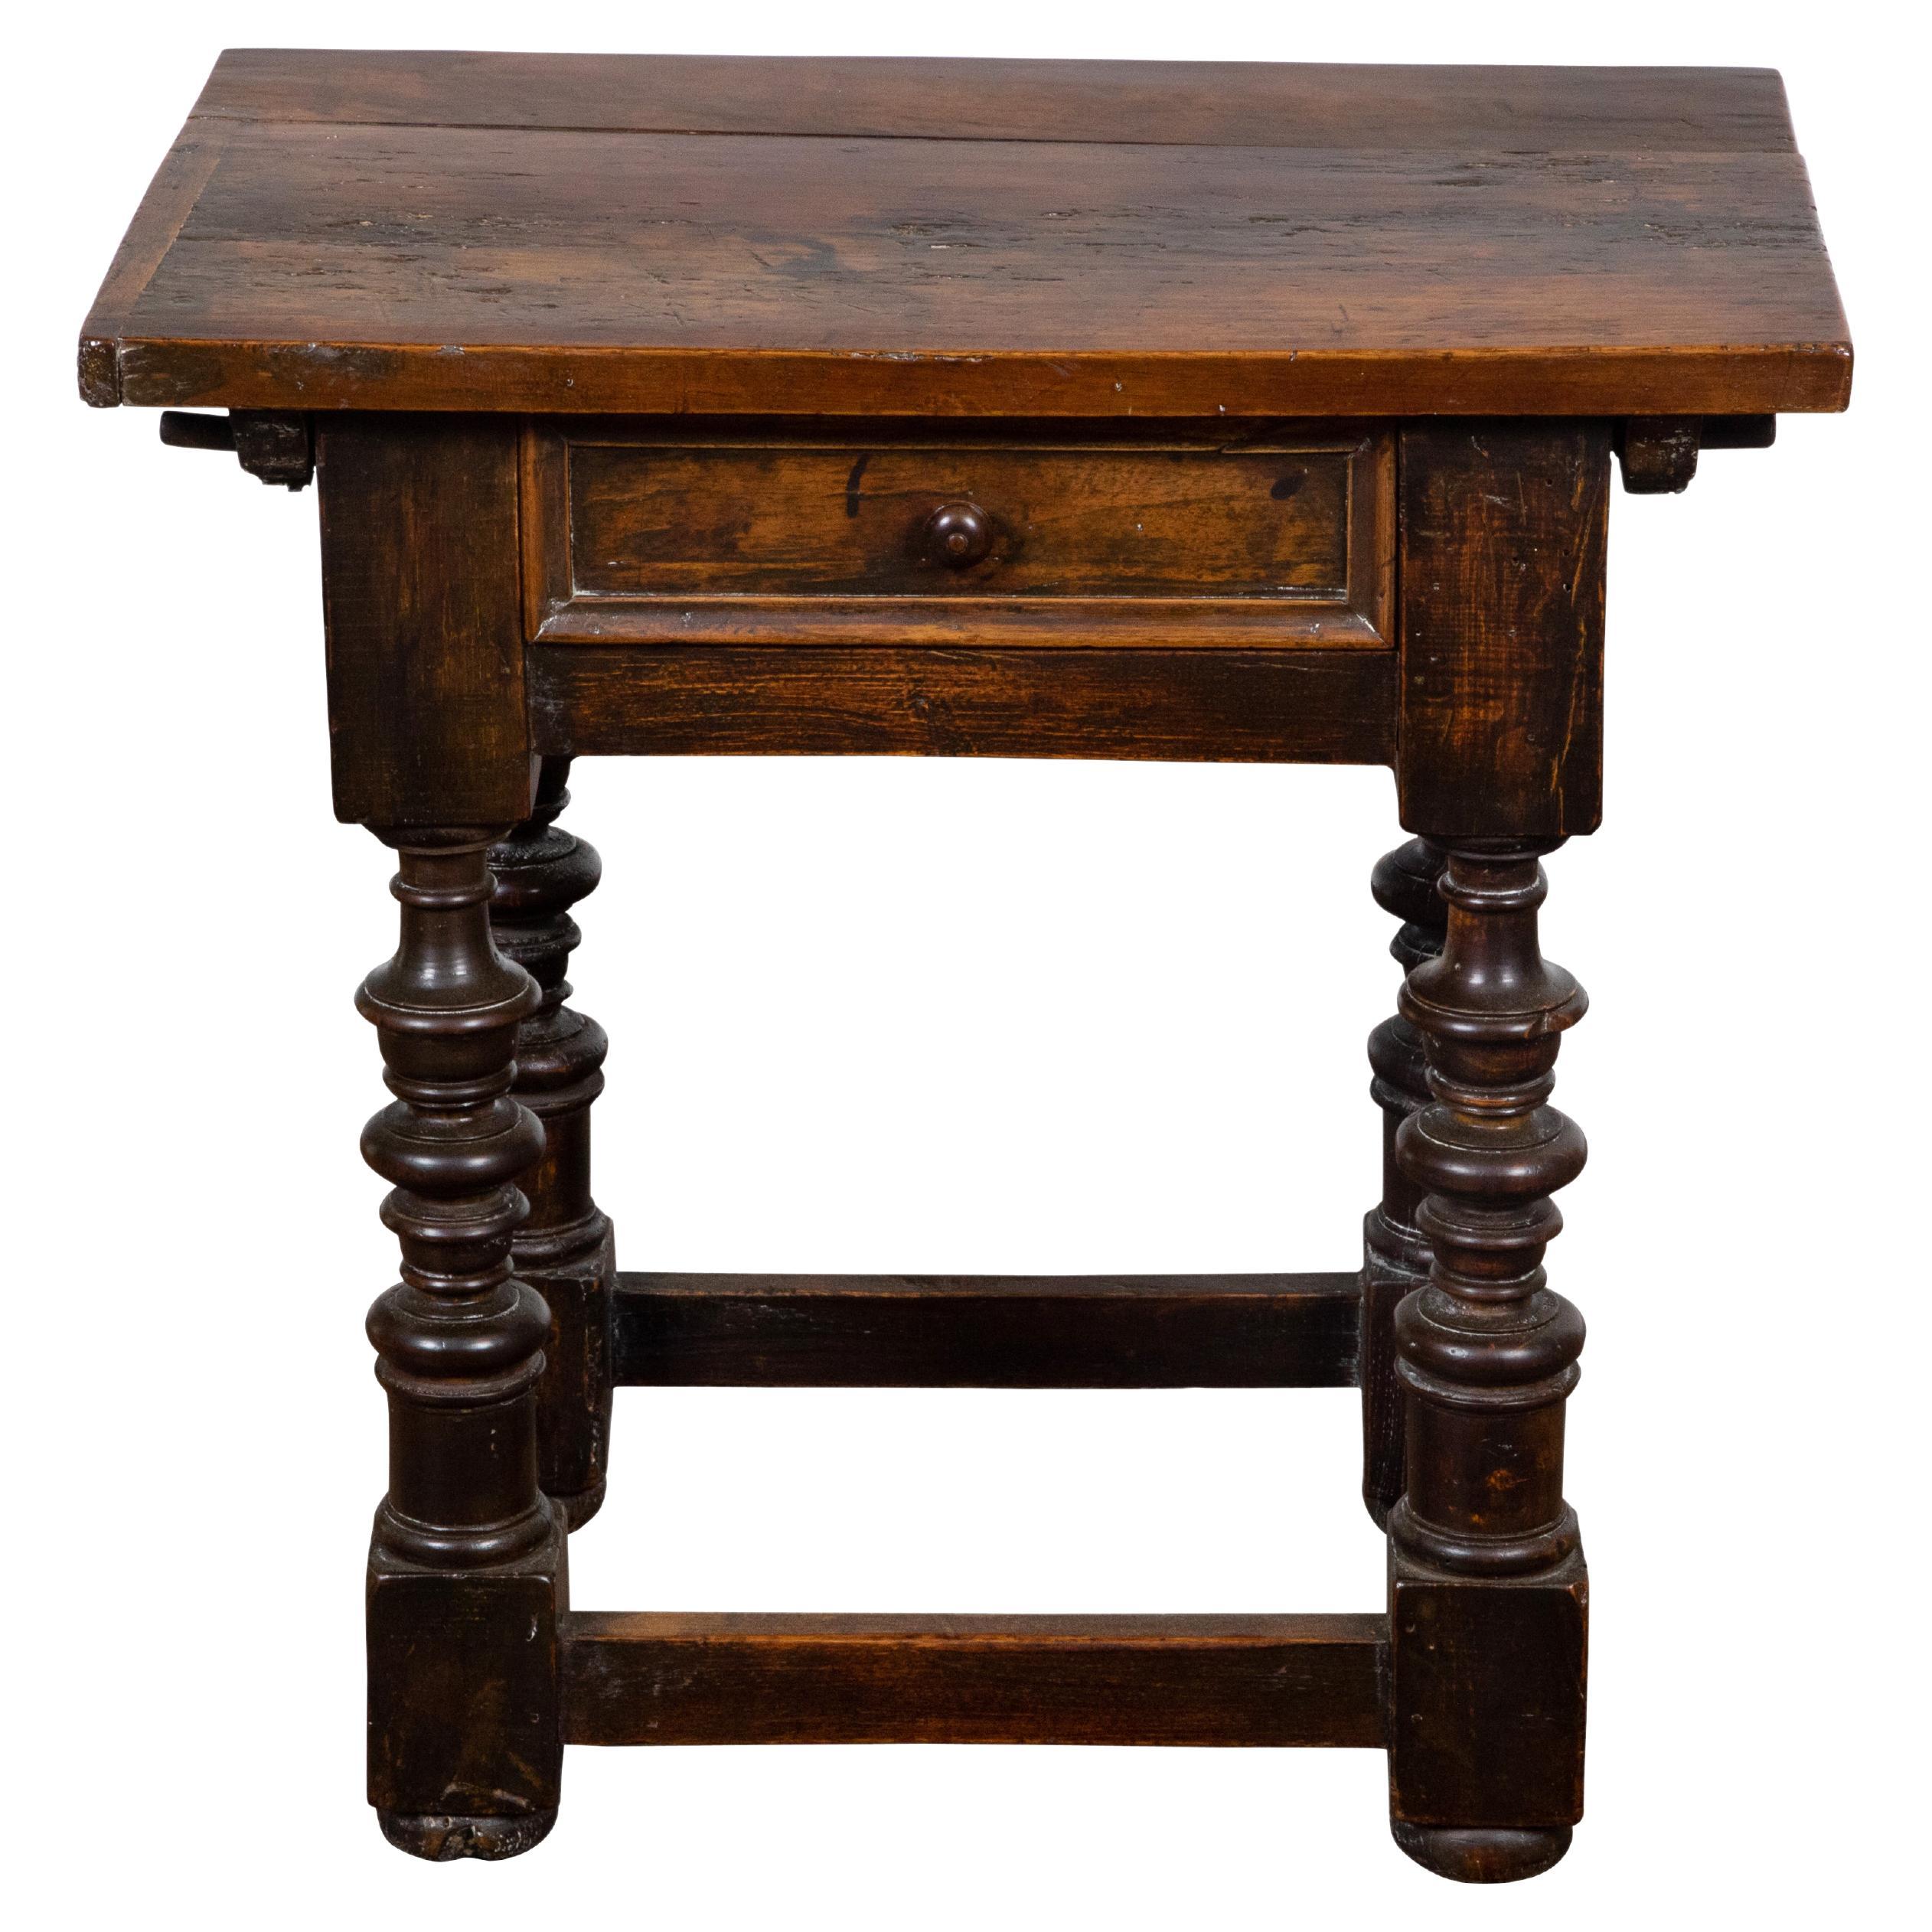 Italian 18th Century Walnut Side Table with Turned Legs and Single Drawer